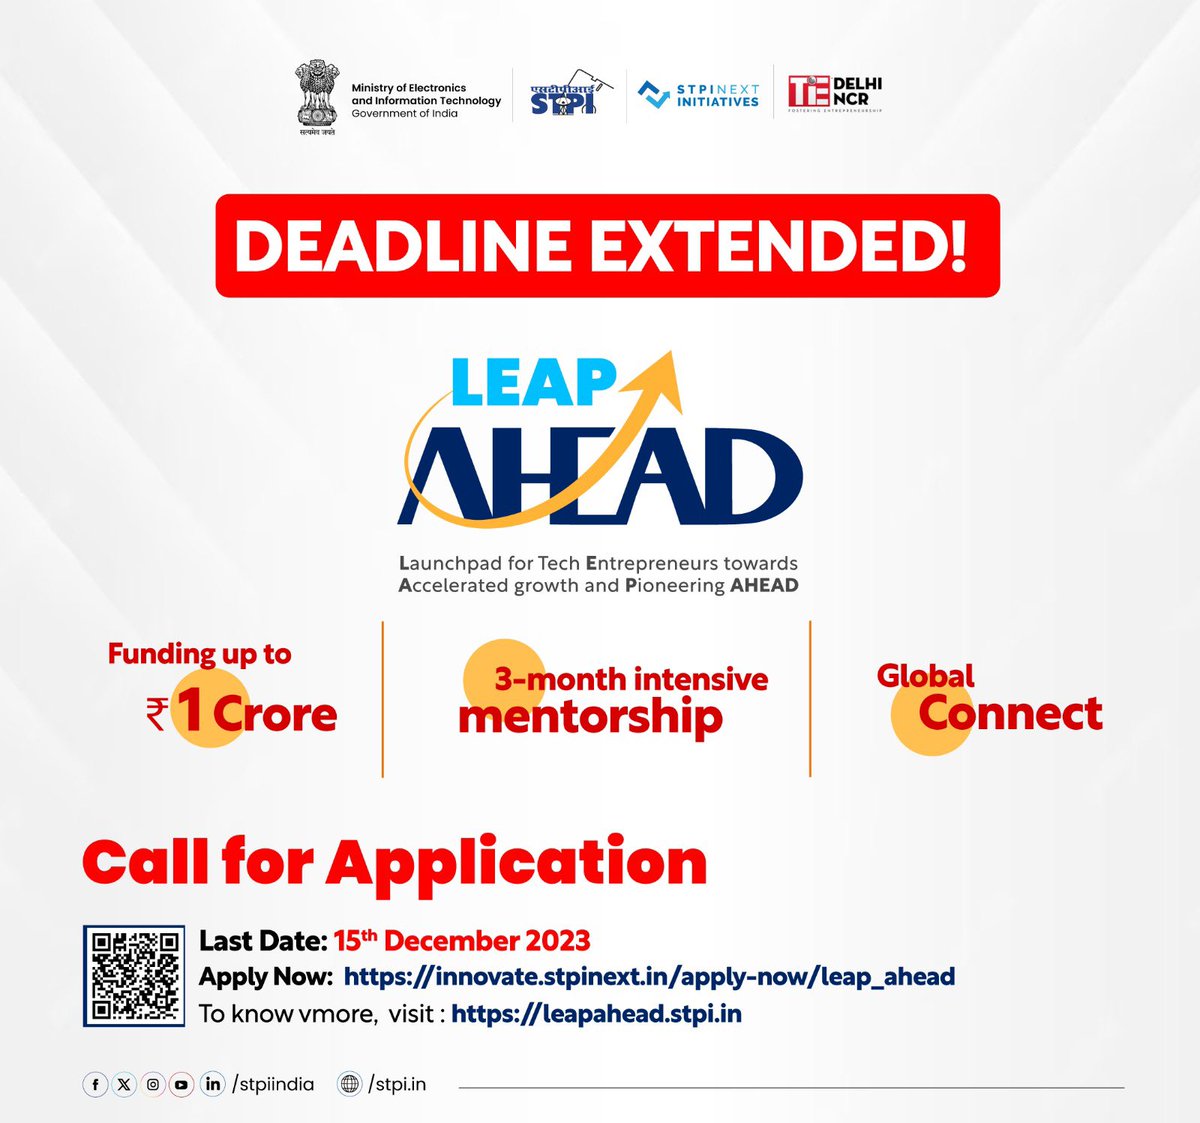 Attention #startups!📢 The deadline for submitting your application for LEAP AHEAD (Launchpad for Tech Entrepreneurs towards Accelerated growth and Pioneering AHEAD) has been extended till 15th December 2023. Apply Now: innovate.stpinext.in/apply-now/leap…